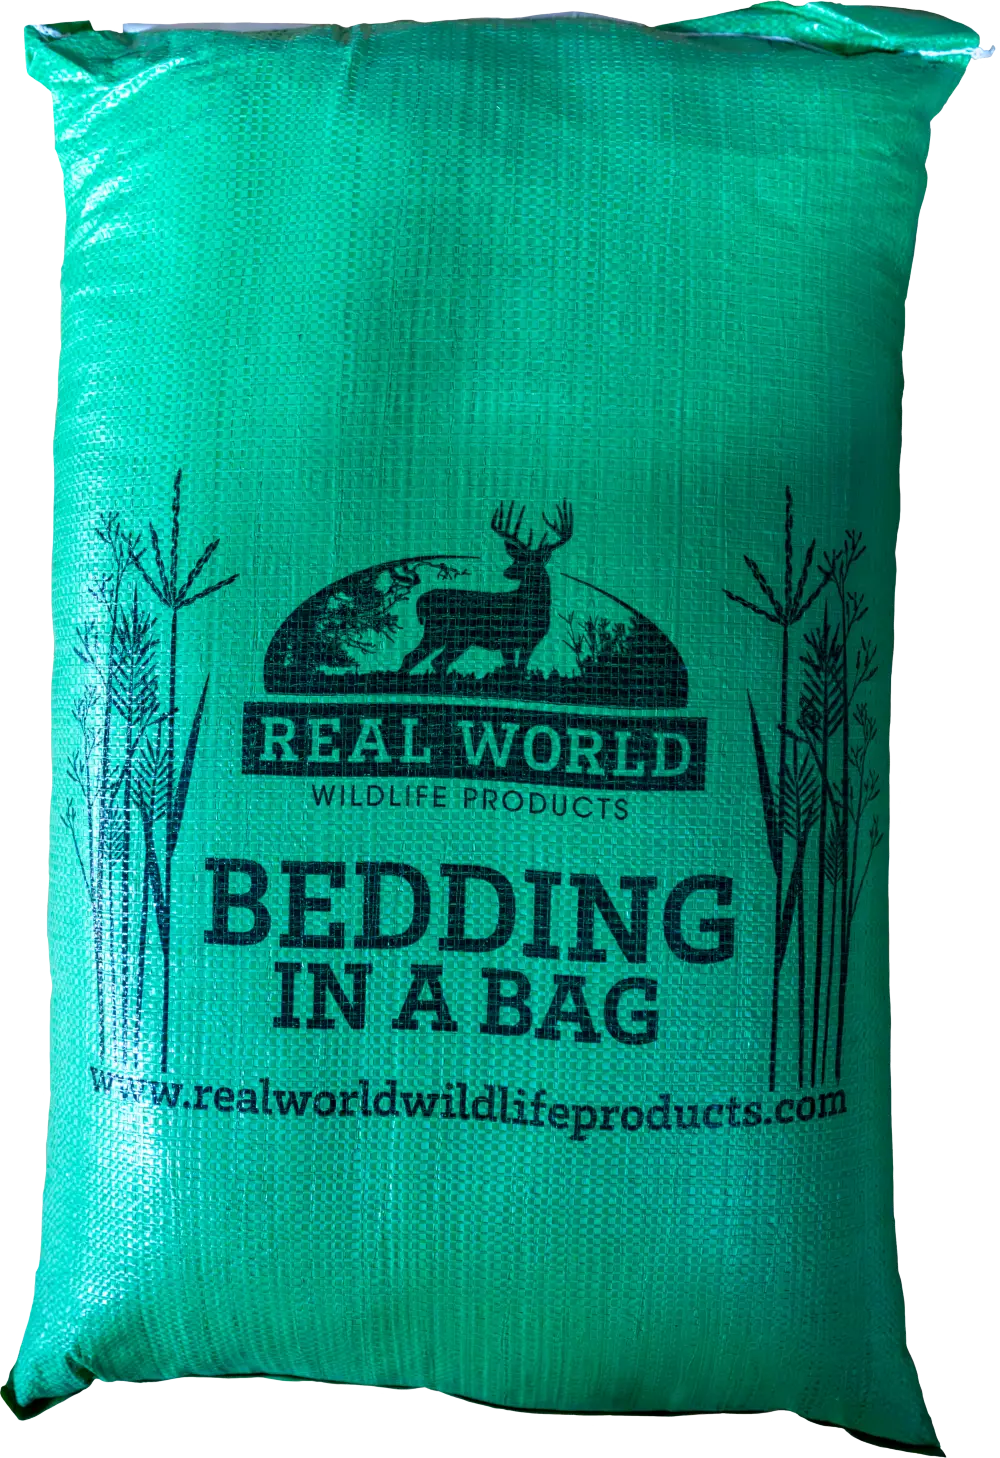 Bedding in a bag (1 acre)